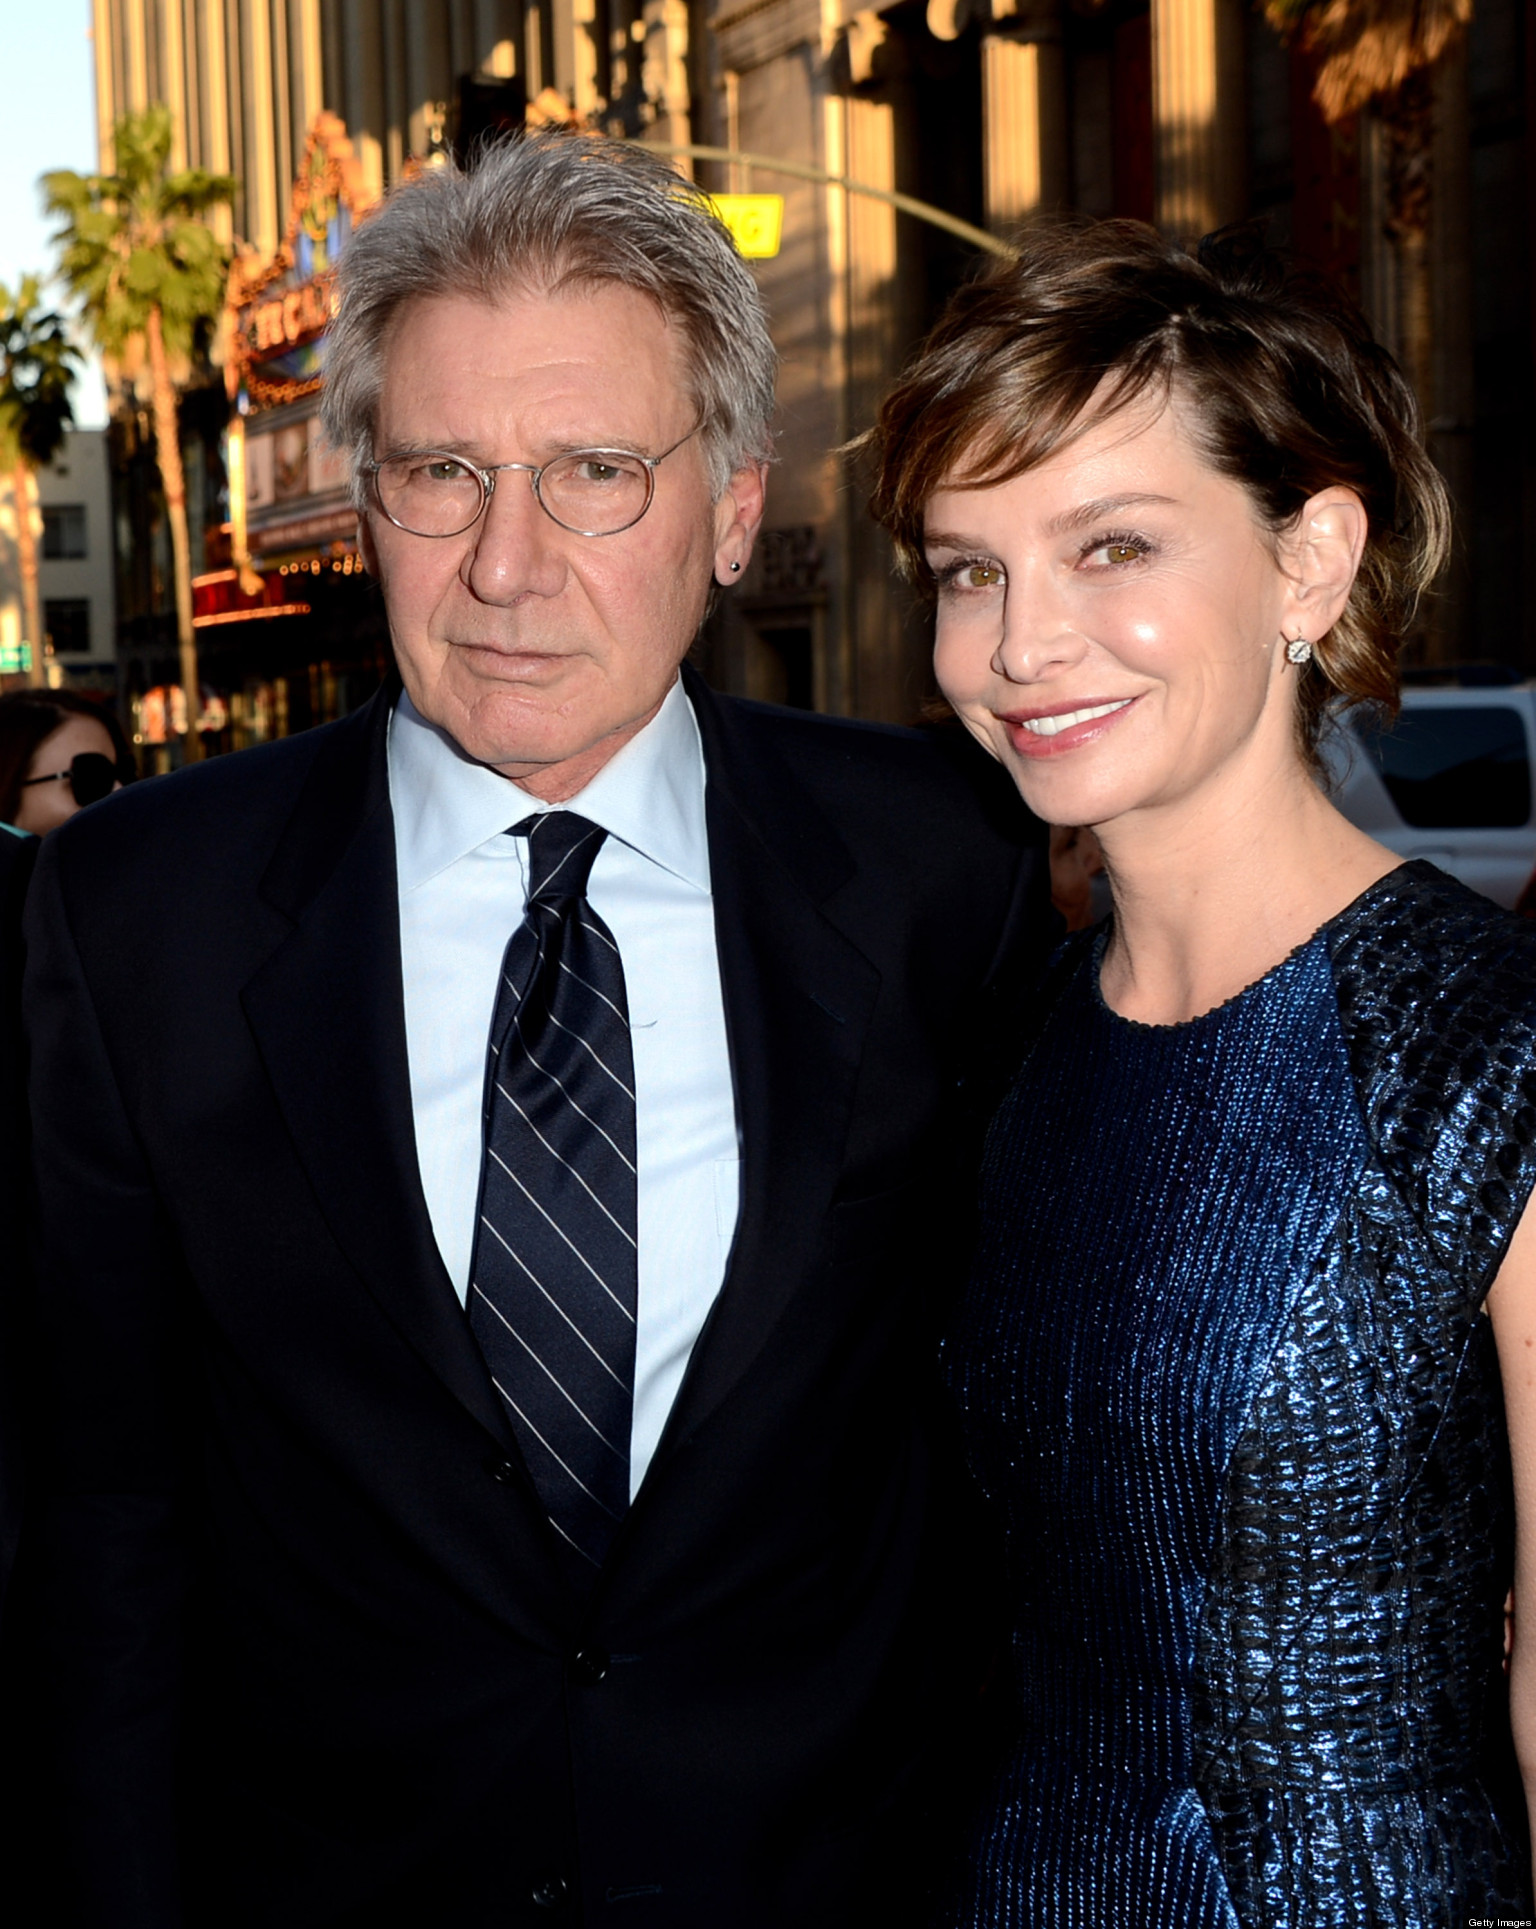 Harrison Ford, Calista Flockhart Shine At The Premiere Of '42' (PHOTO